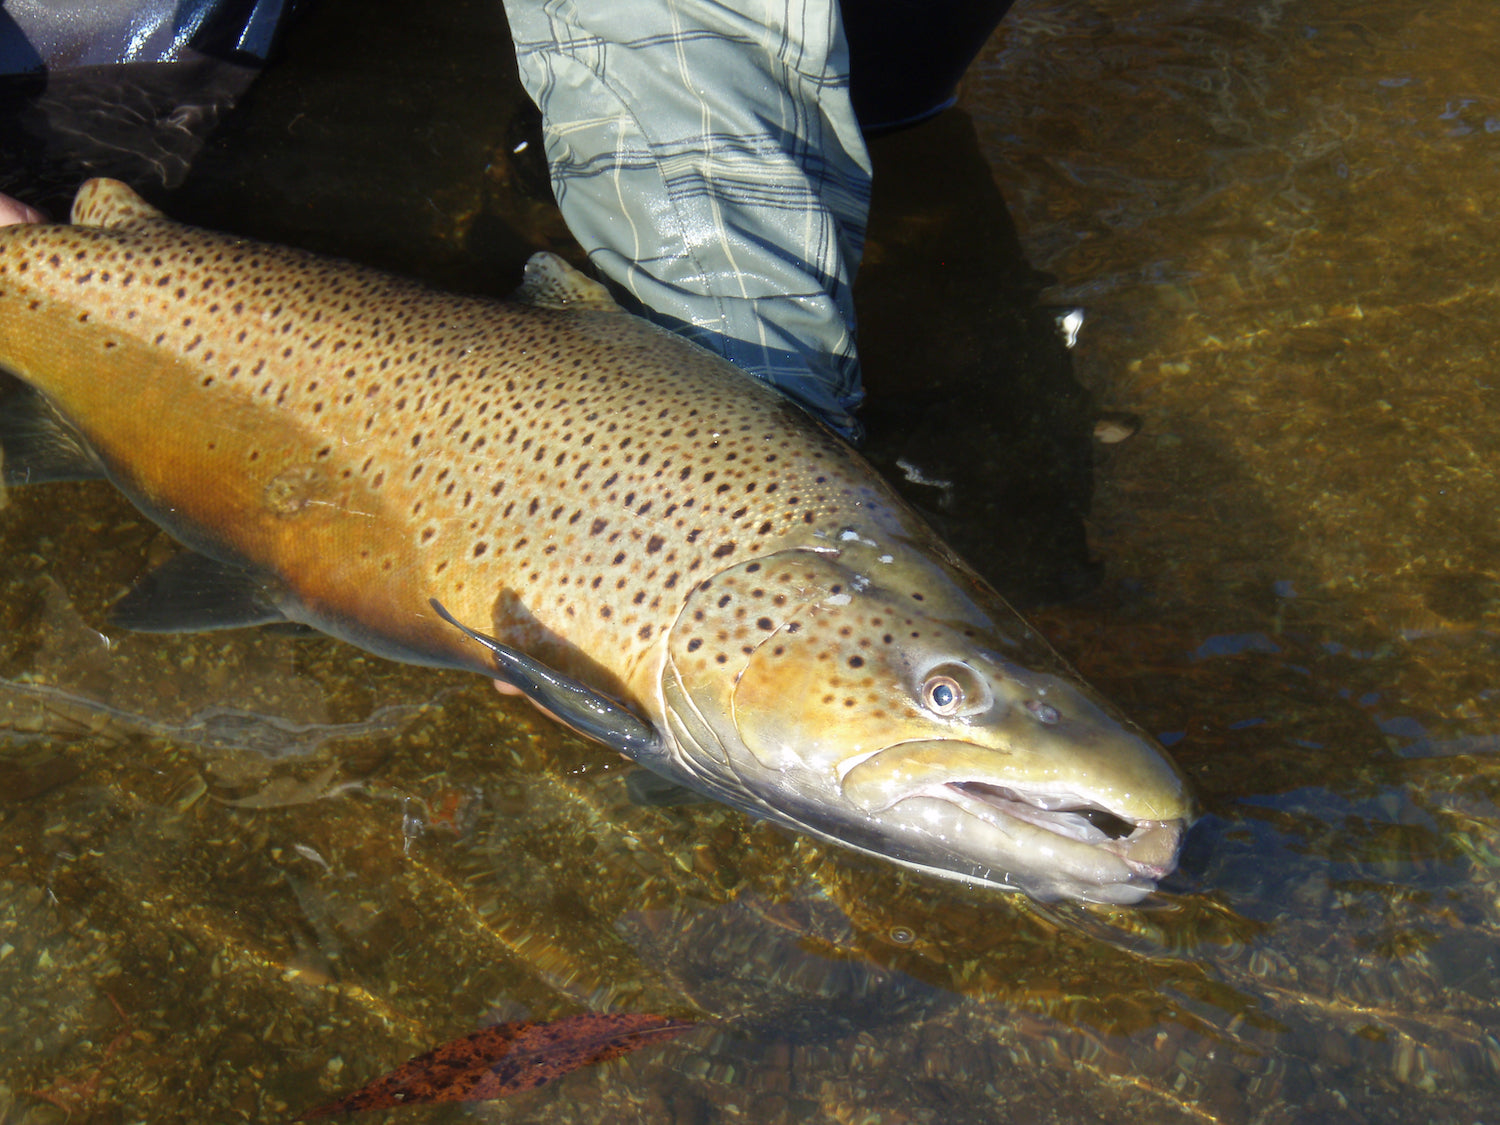 World-Class Brown Trout Fishing by Jim Teeny – Great Lakes Angler